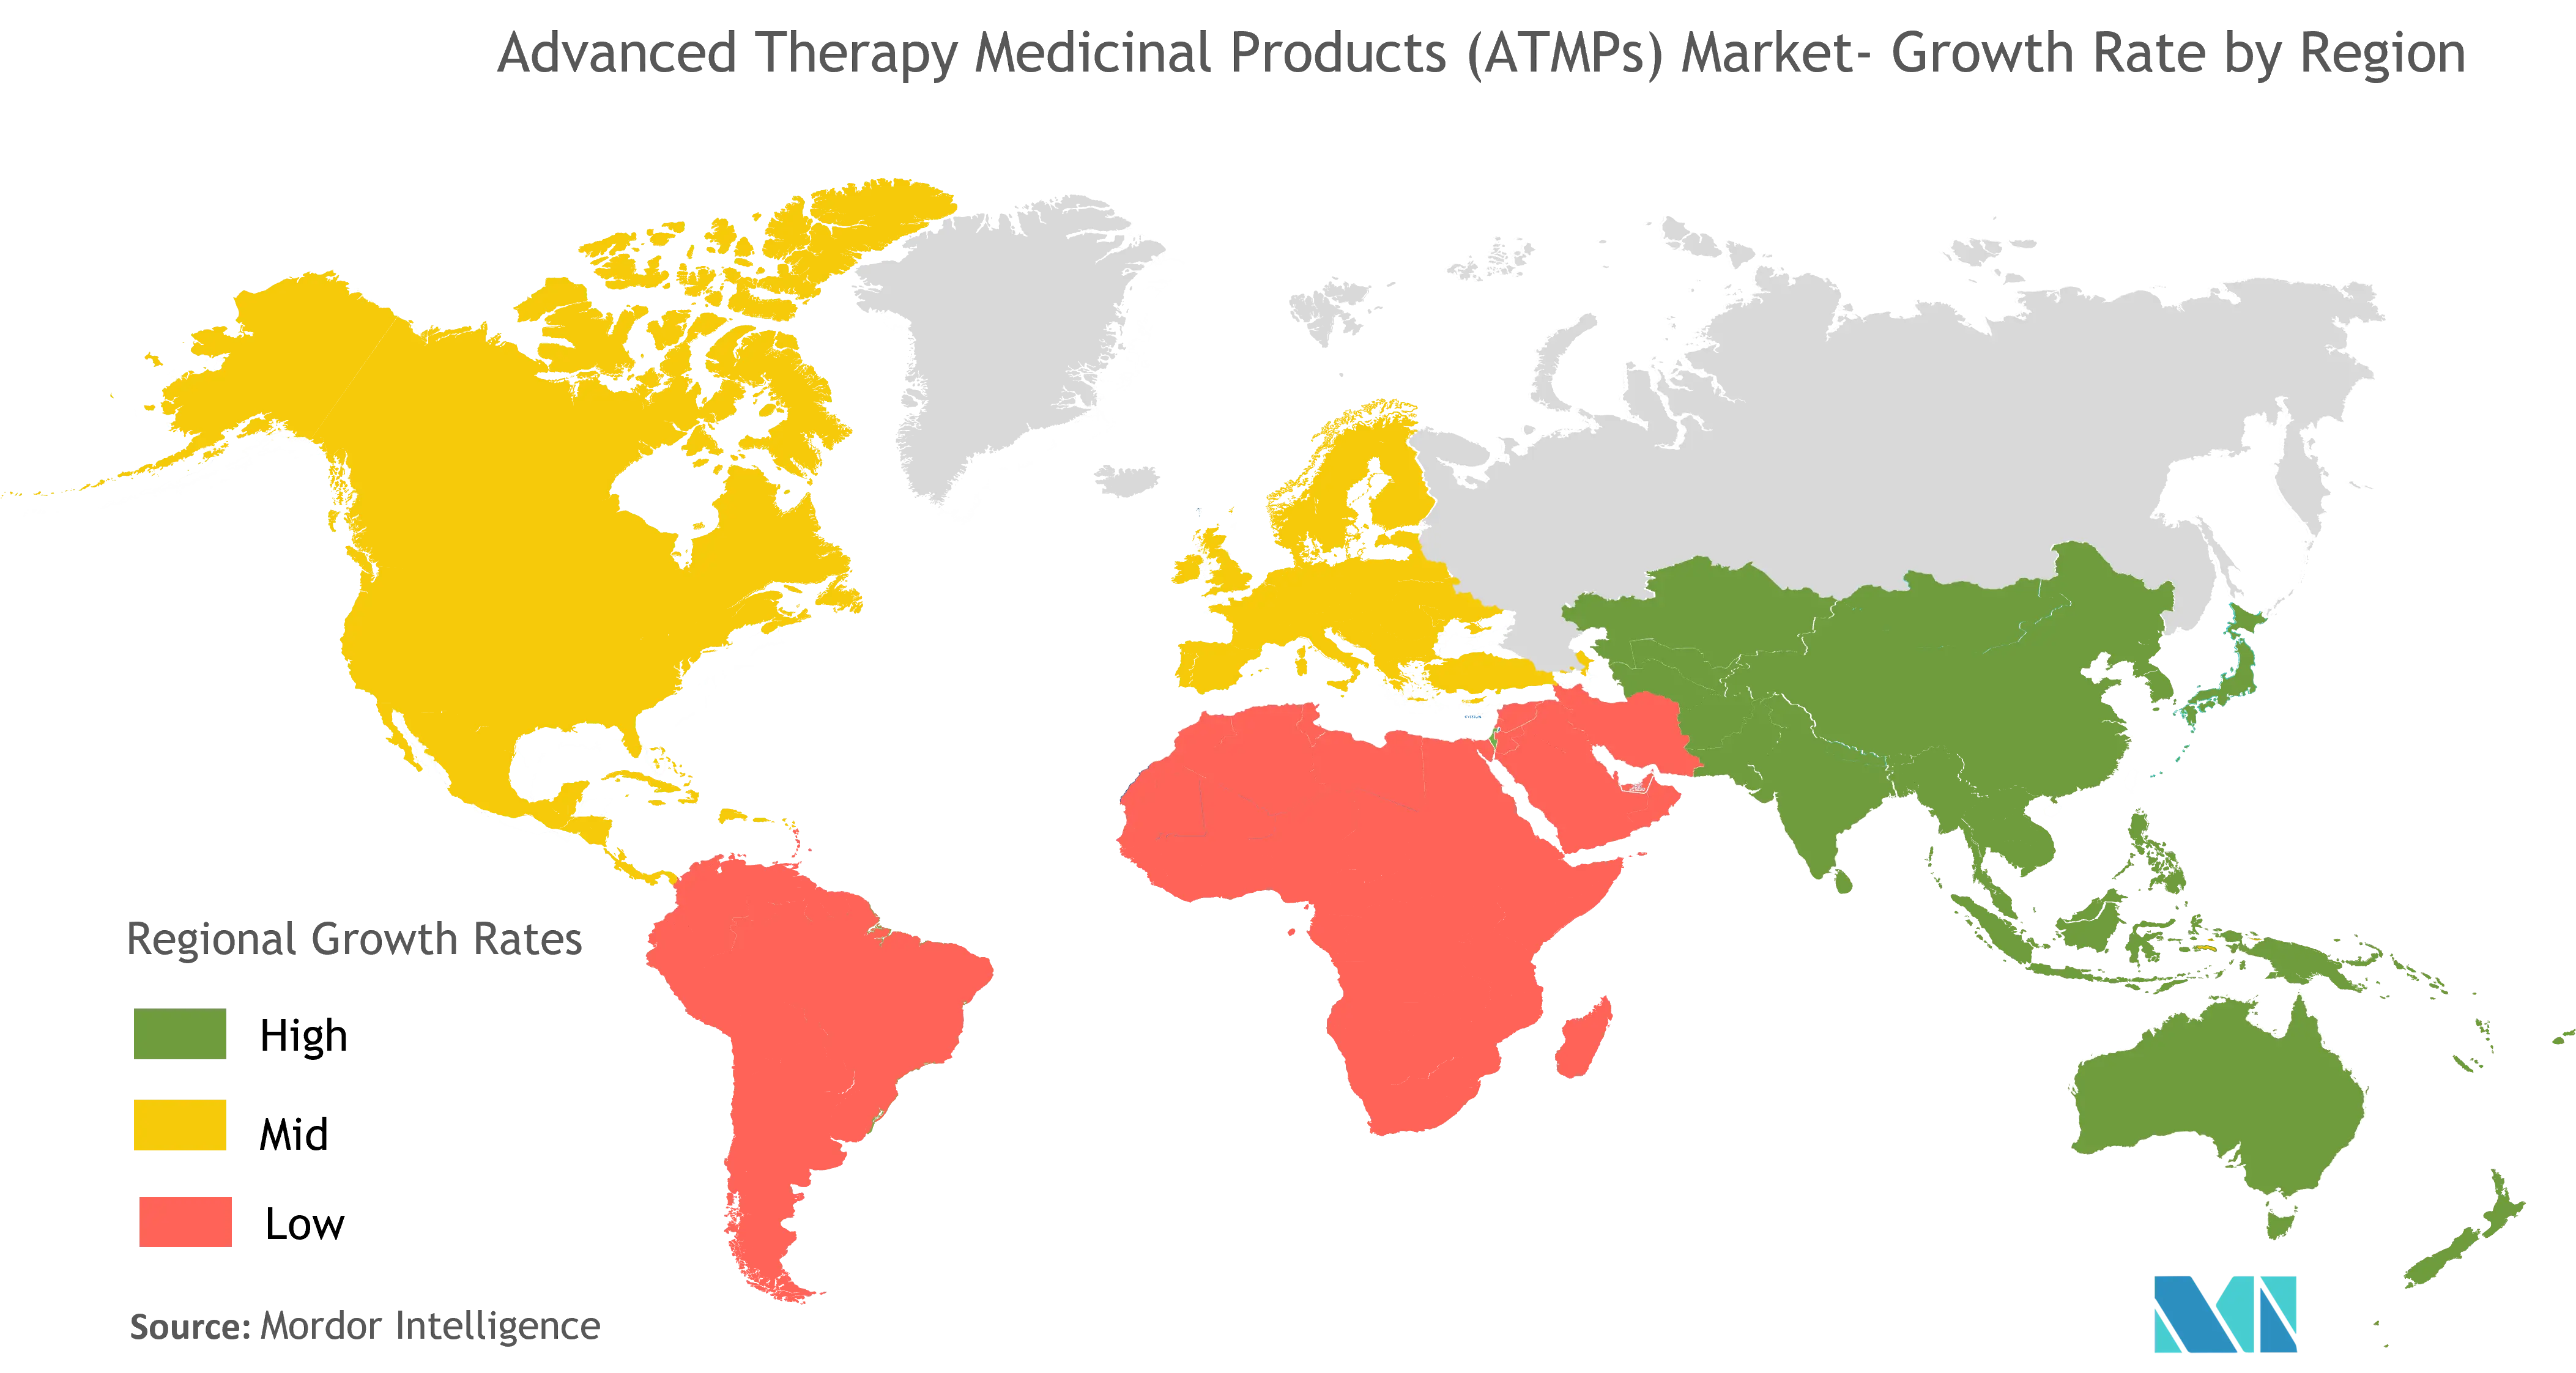 Advance Therapy Medicinal Products Market Analysis